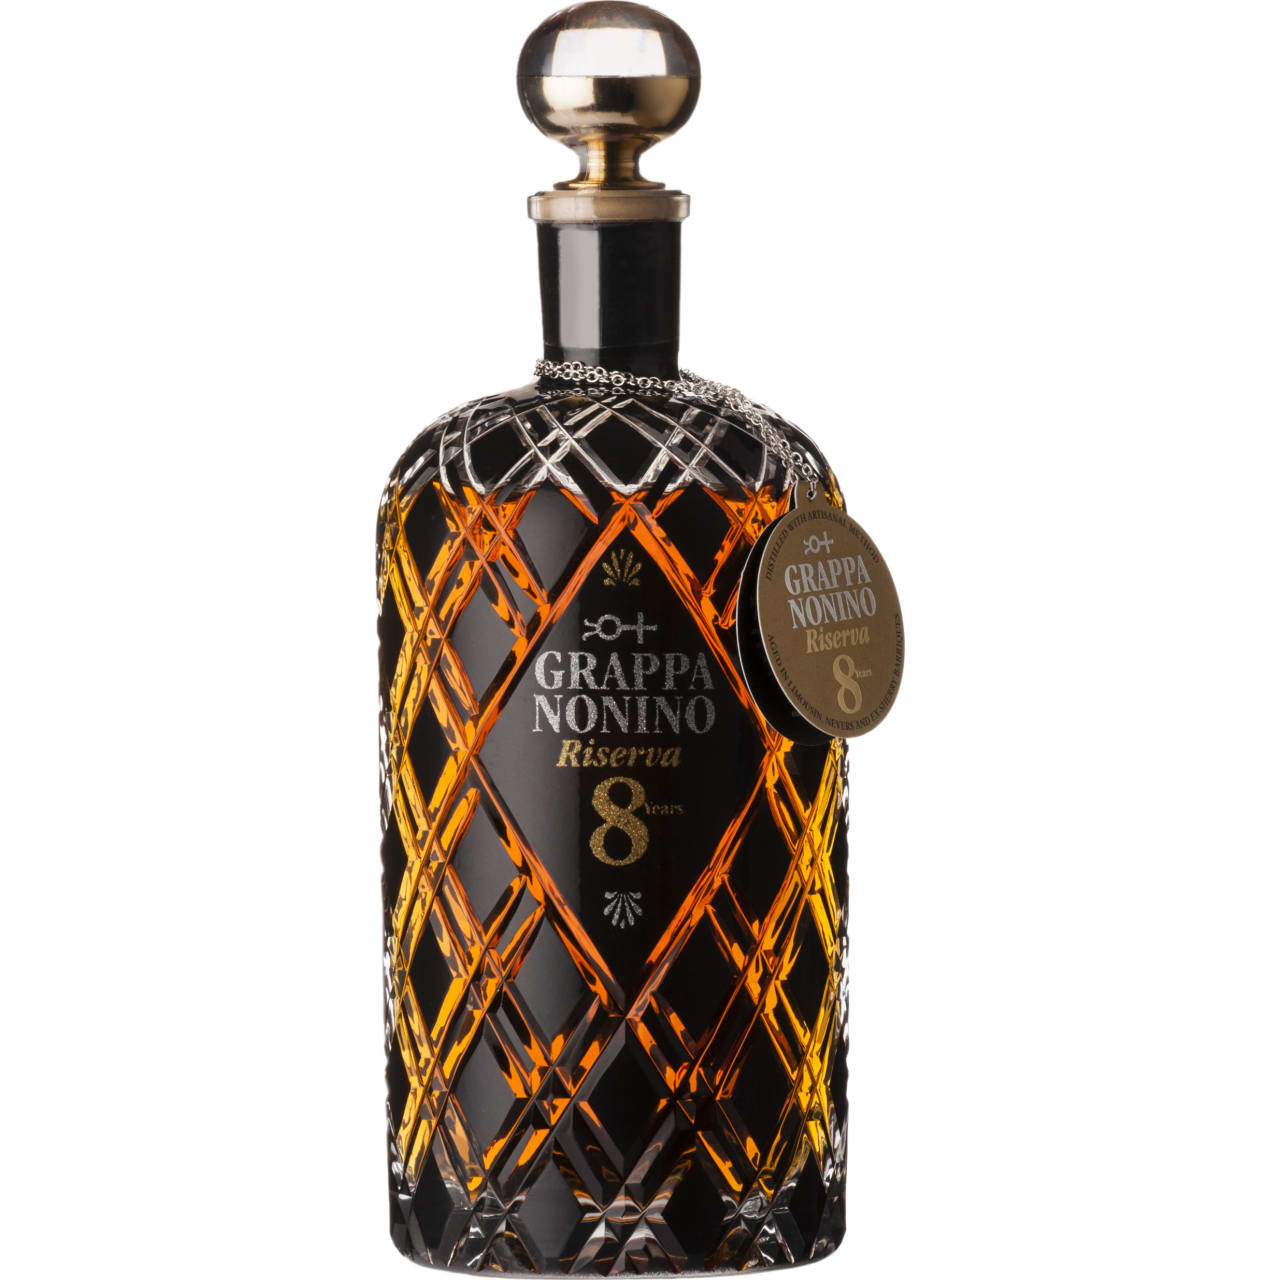 Grappa Riserva 8 Years by Nonino is a blend of Monovitigno grappas made from Schioppettino, Chardonnay and Merlot grapes that ages for 8 years in French Limousin and Nevers oak barrels and in small ex-Sherry barrels under seal and control of the Agenzia delle Customs and Monopolies.